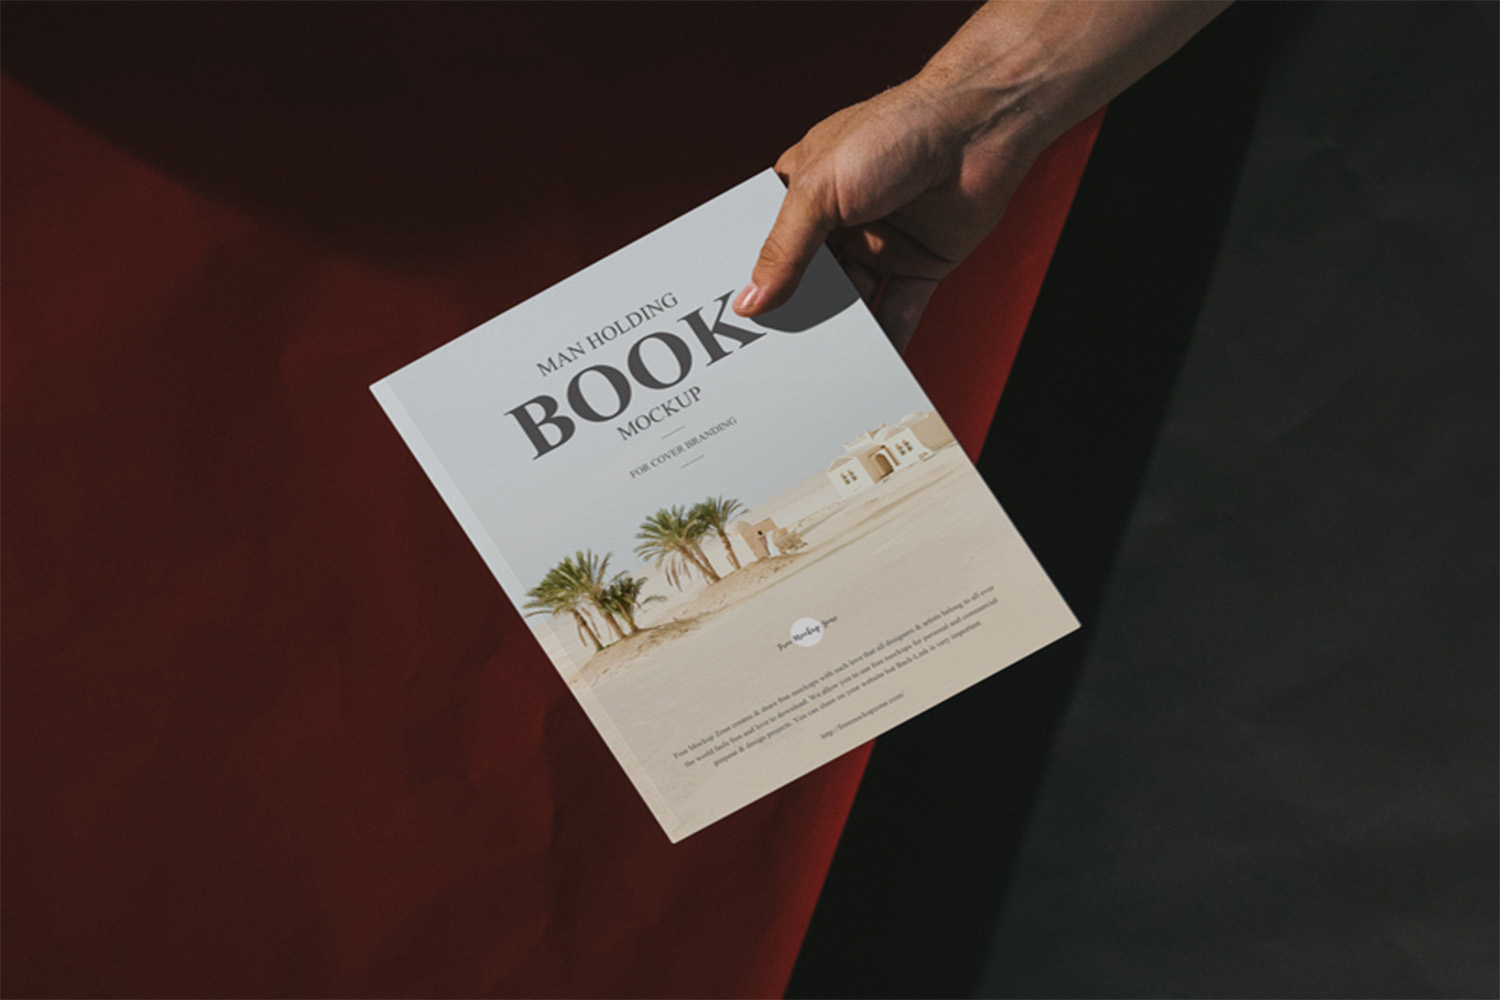 Man Holding Book Cover Mockup Free Download